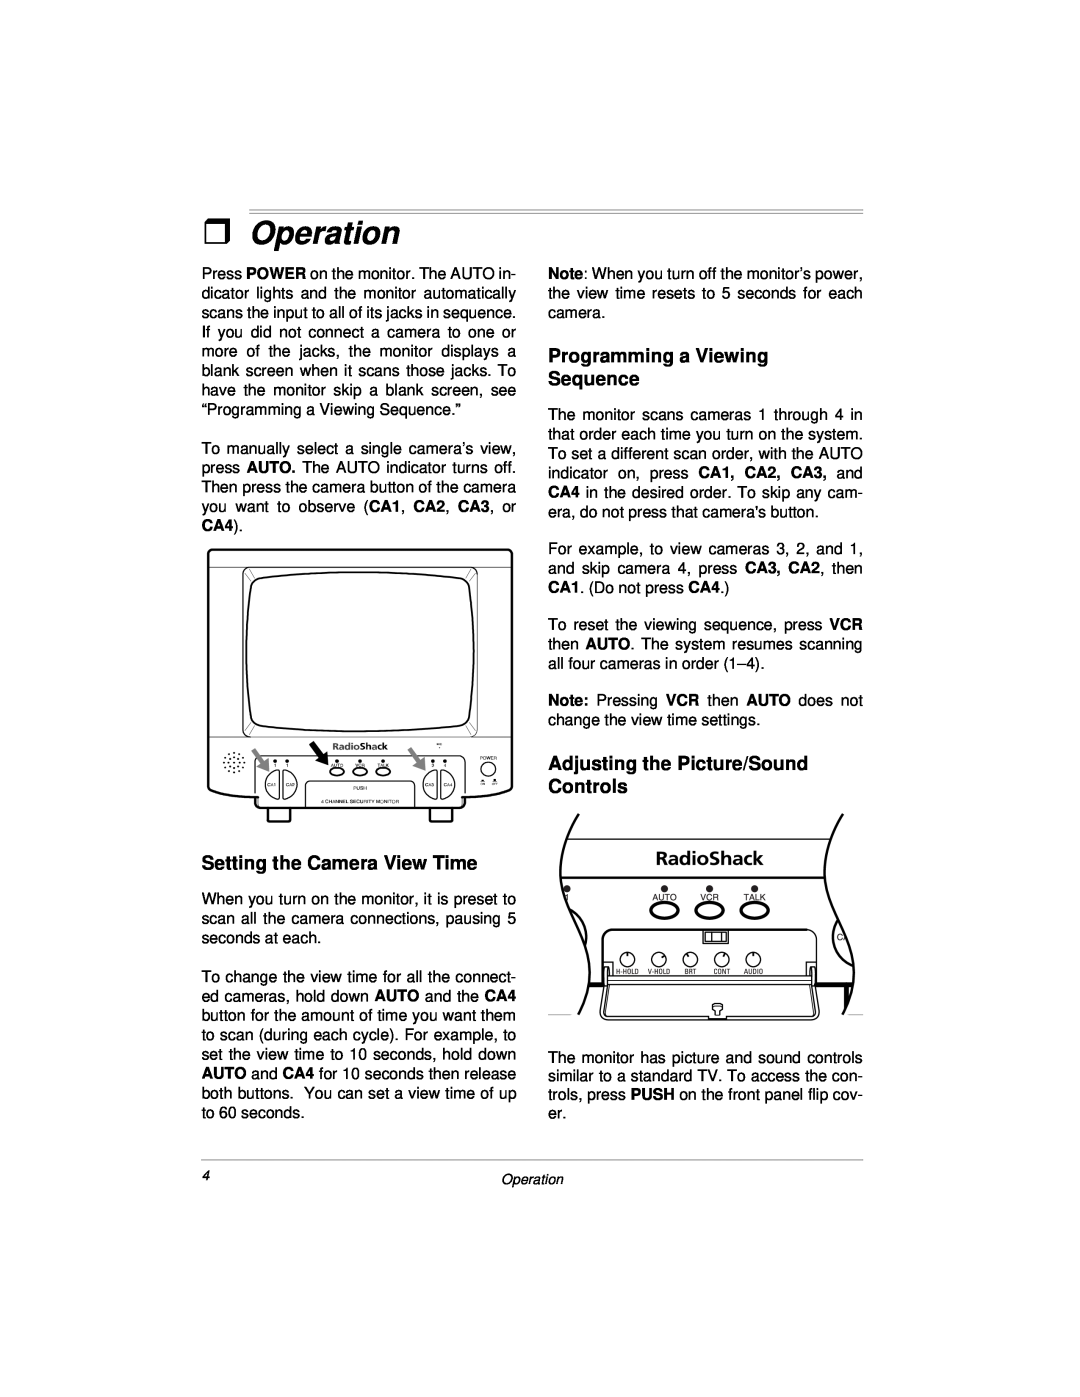 Radio Shack 49-2512, 49-2513 owner manual ˆOperation, Setting the Camera View Time, Programming a Viewing Sequence 